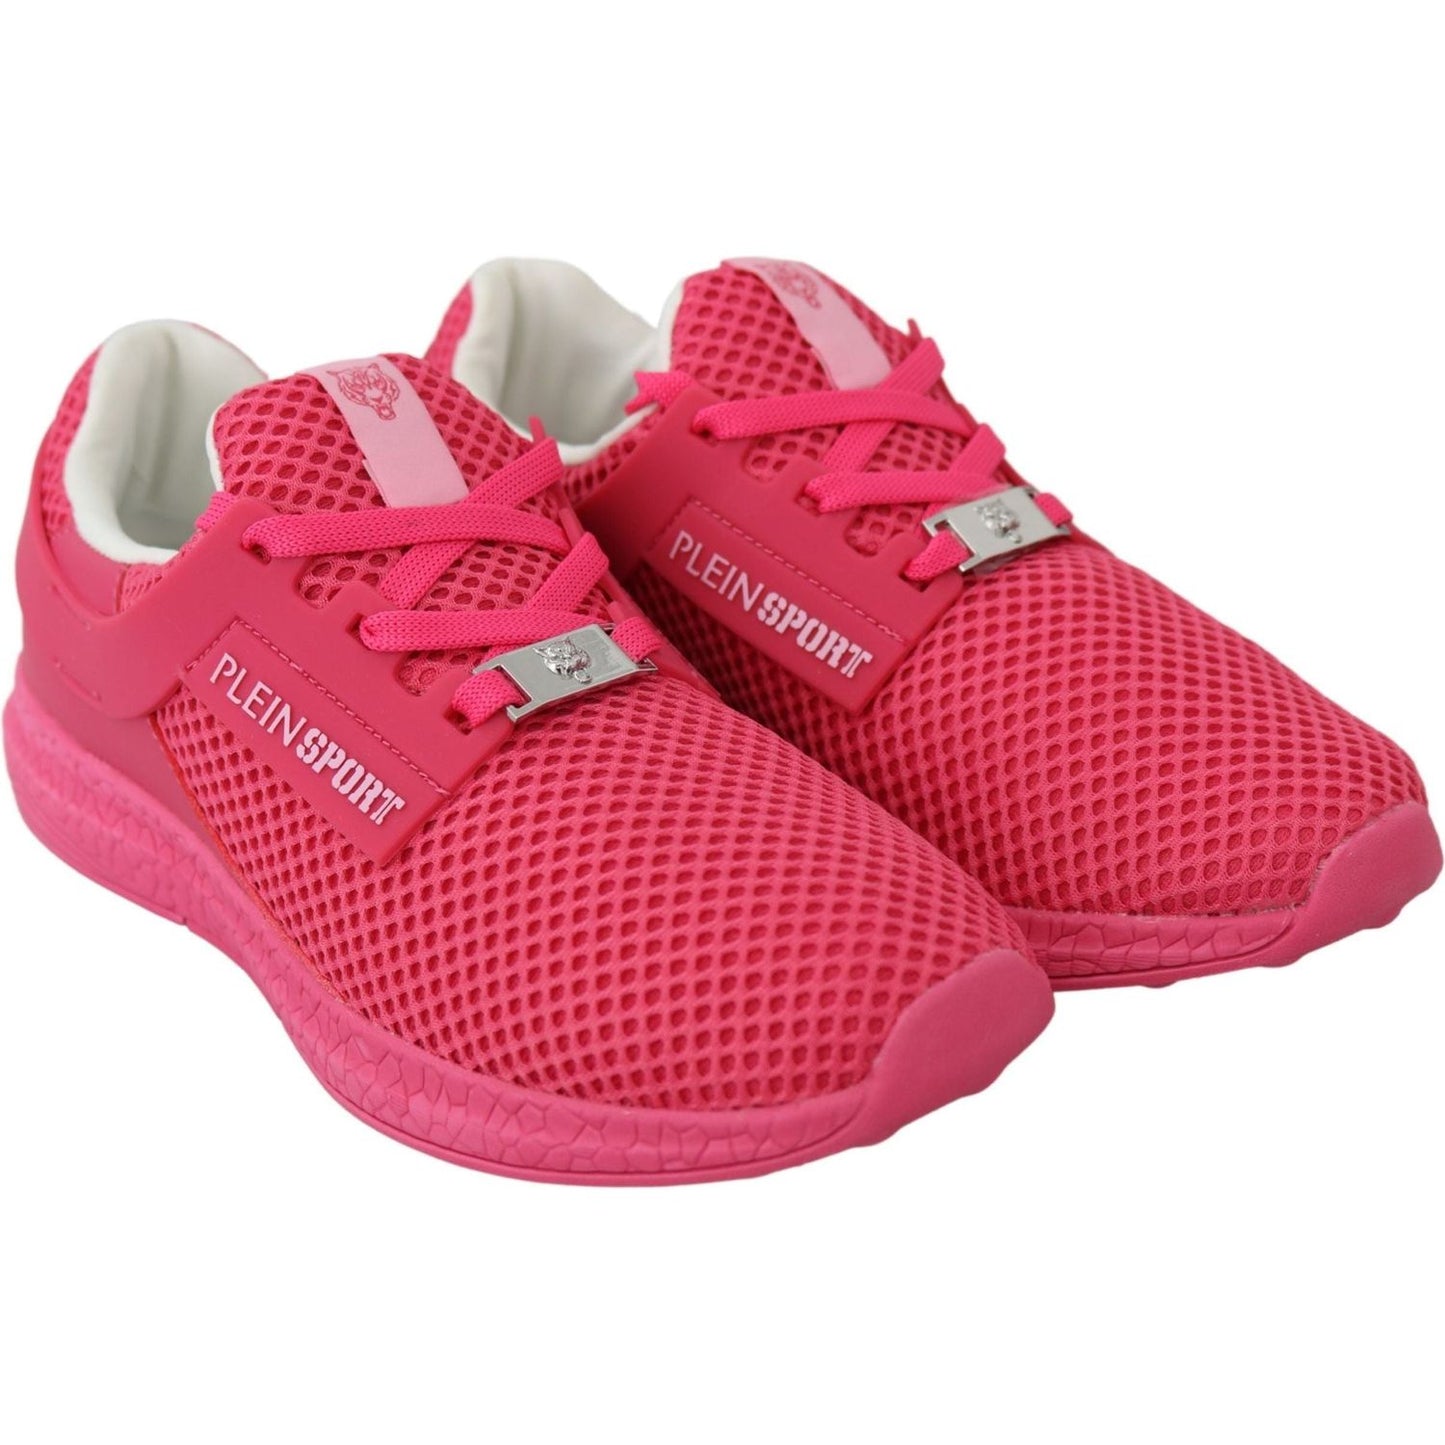 Plein Sport Fuxia Beetroot Polyester Runner Becky Sneakers Shoes fuxia-beetroot-polyester-runner-becky-sneakers-shoes